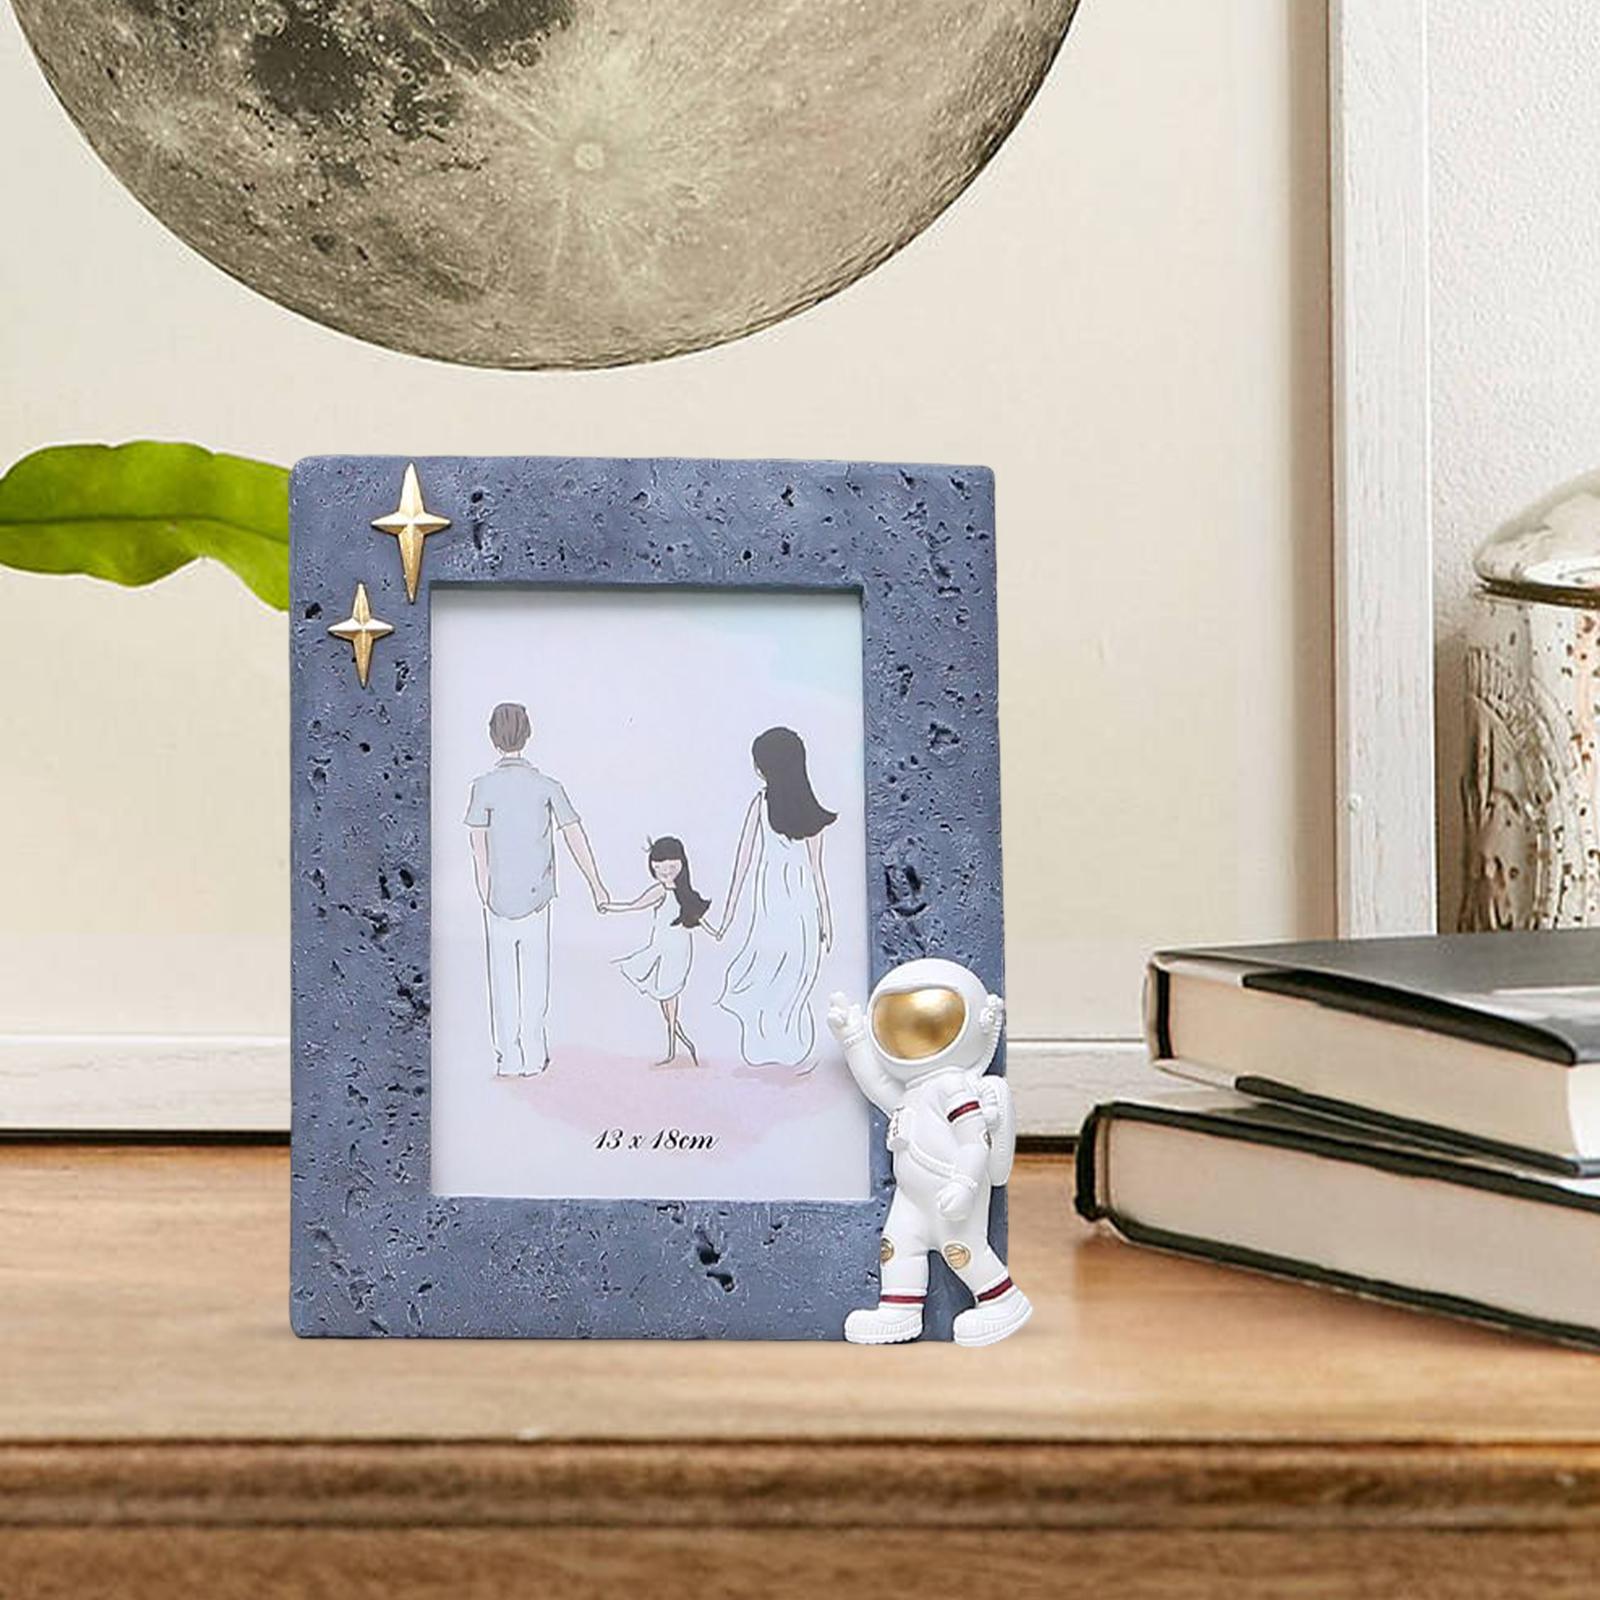 Resin Astronaut Photo Wall & Table Top Frames Photo Holder for Home 7inch